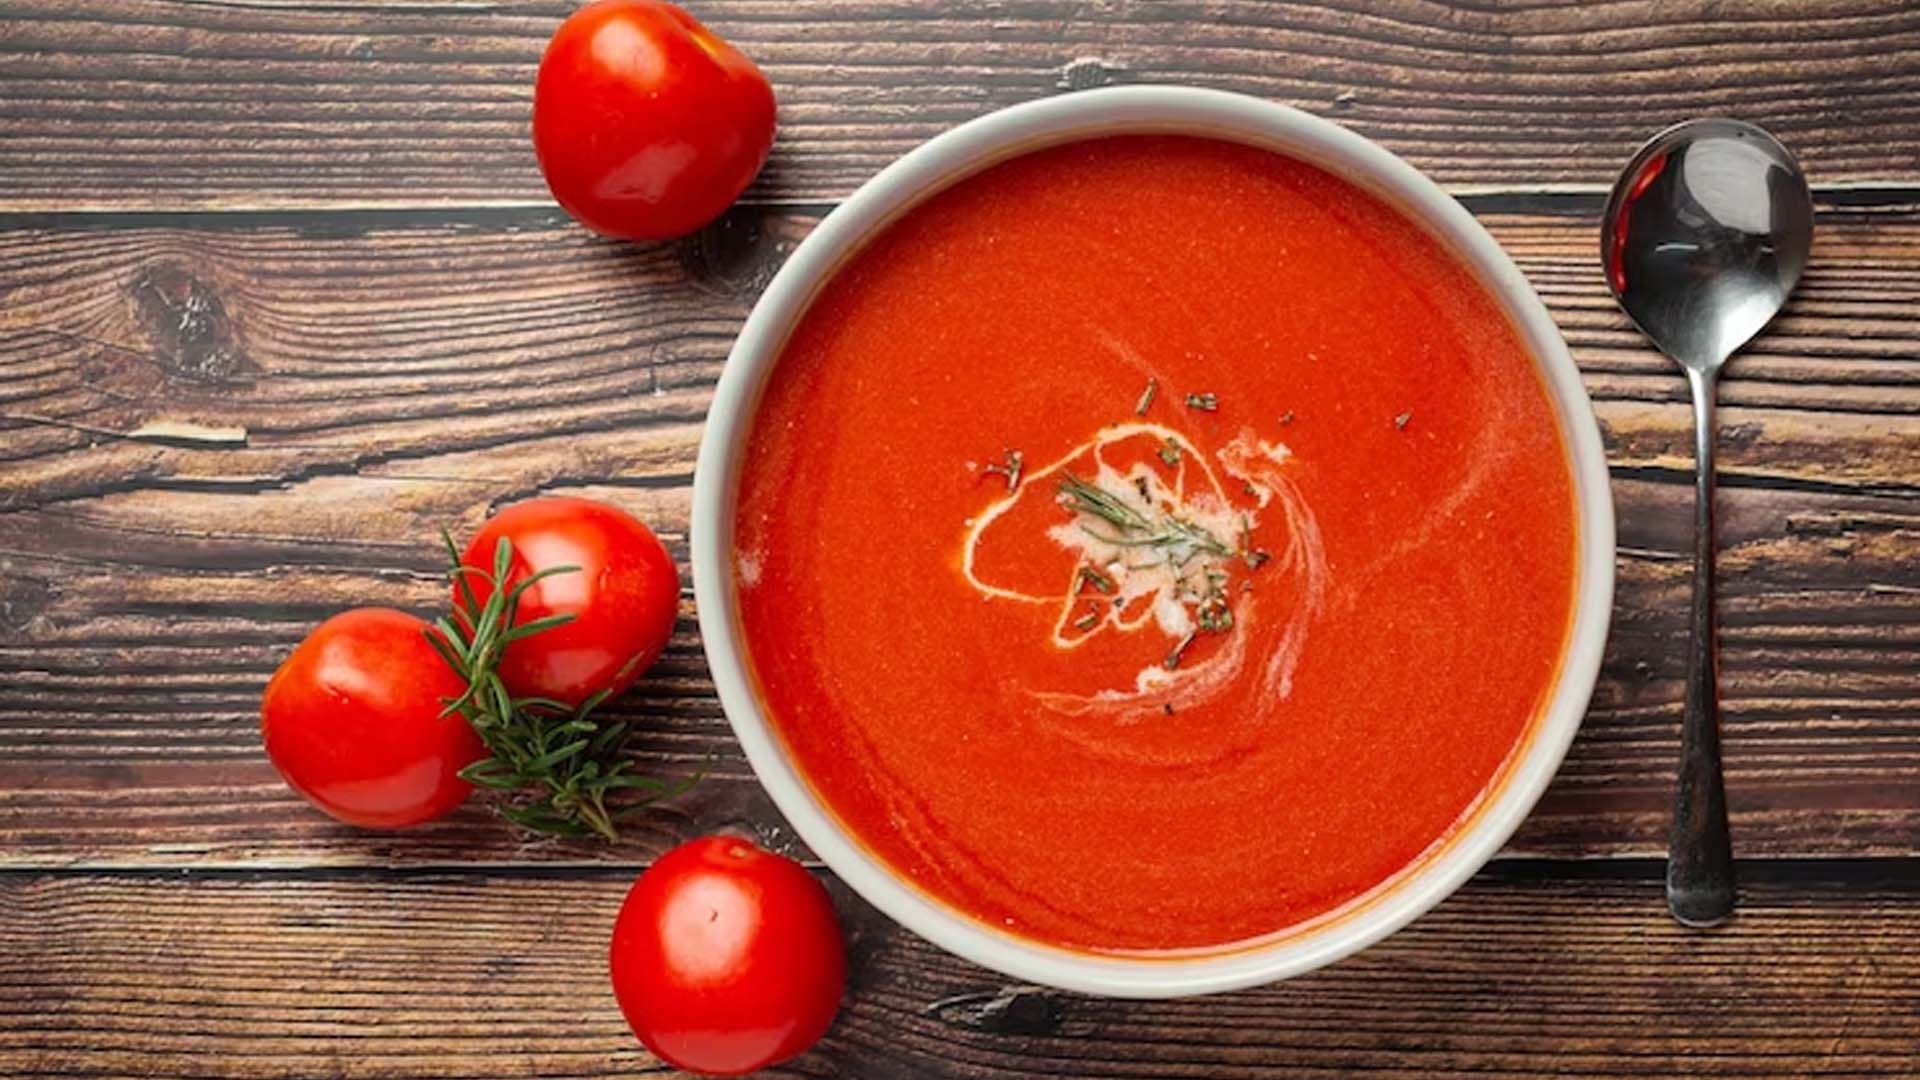 Health Benefits of Eating Tomato Soup Daily